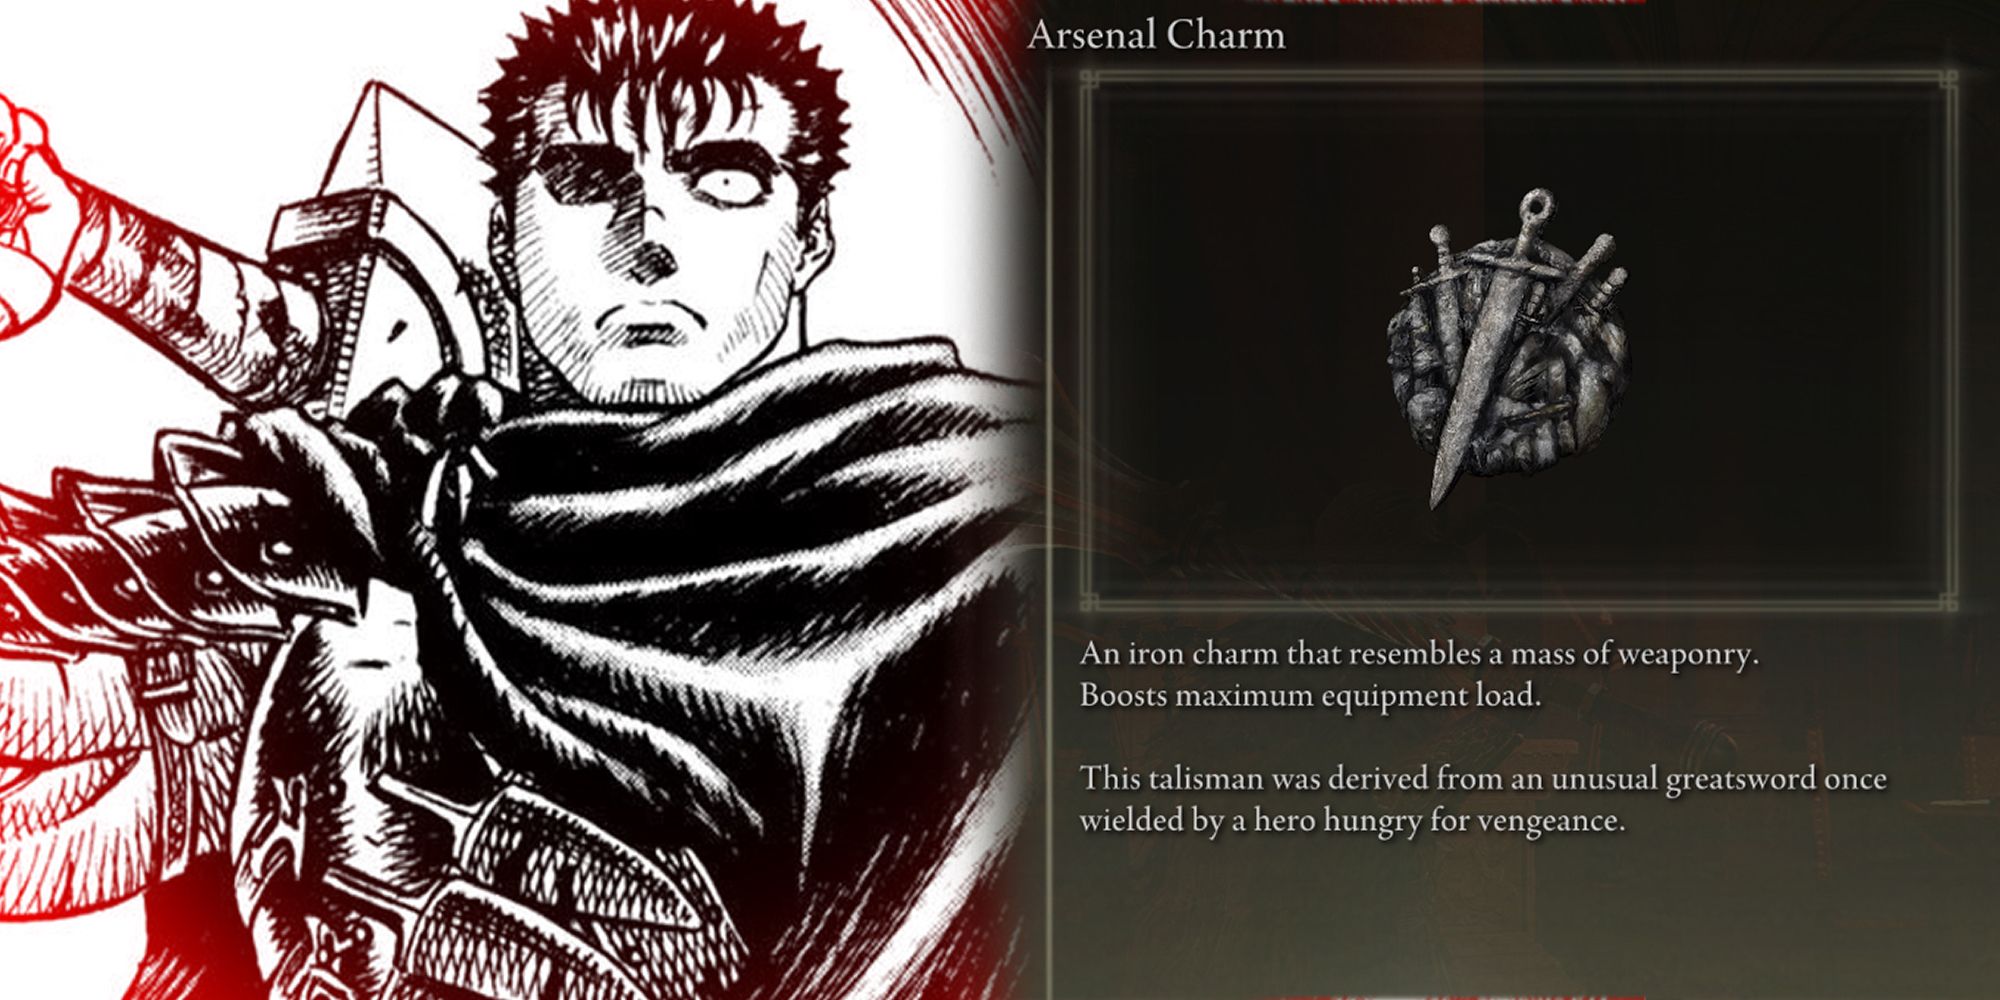 Elden Ring - Side By Side Comparison Of Guts Staring Ahead With A Lust For Vengeance And Arsenal Charm In-Game